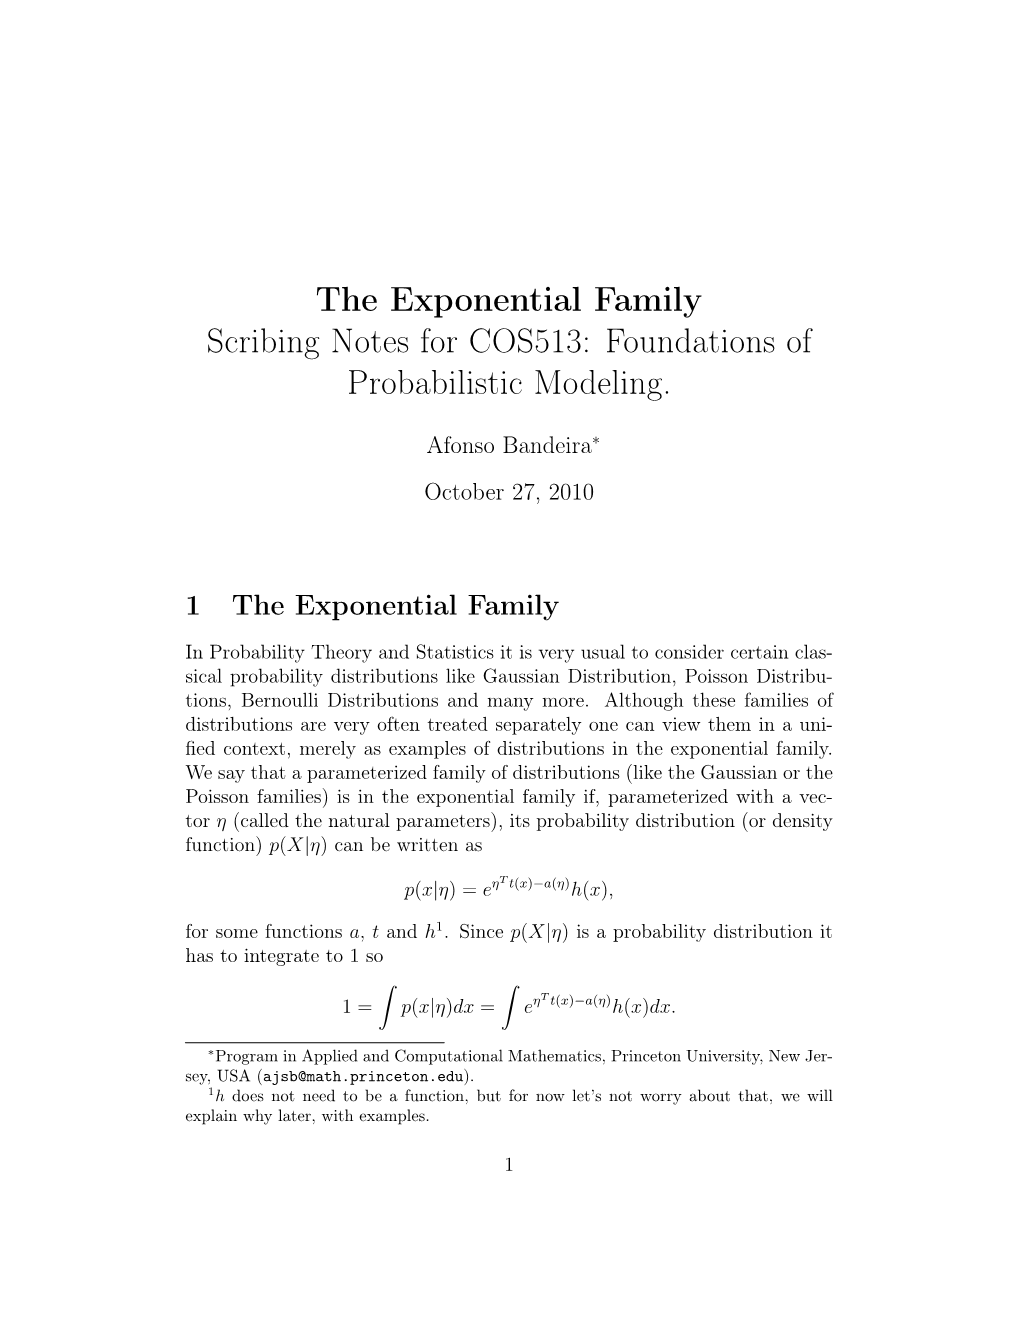 The Exponential Family Scribing Notes for COS513: Foundations of Probabilistic Modeling